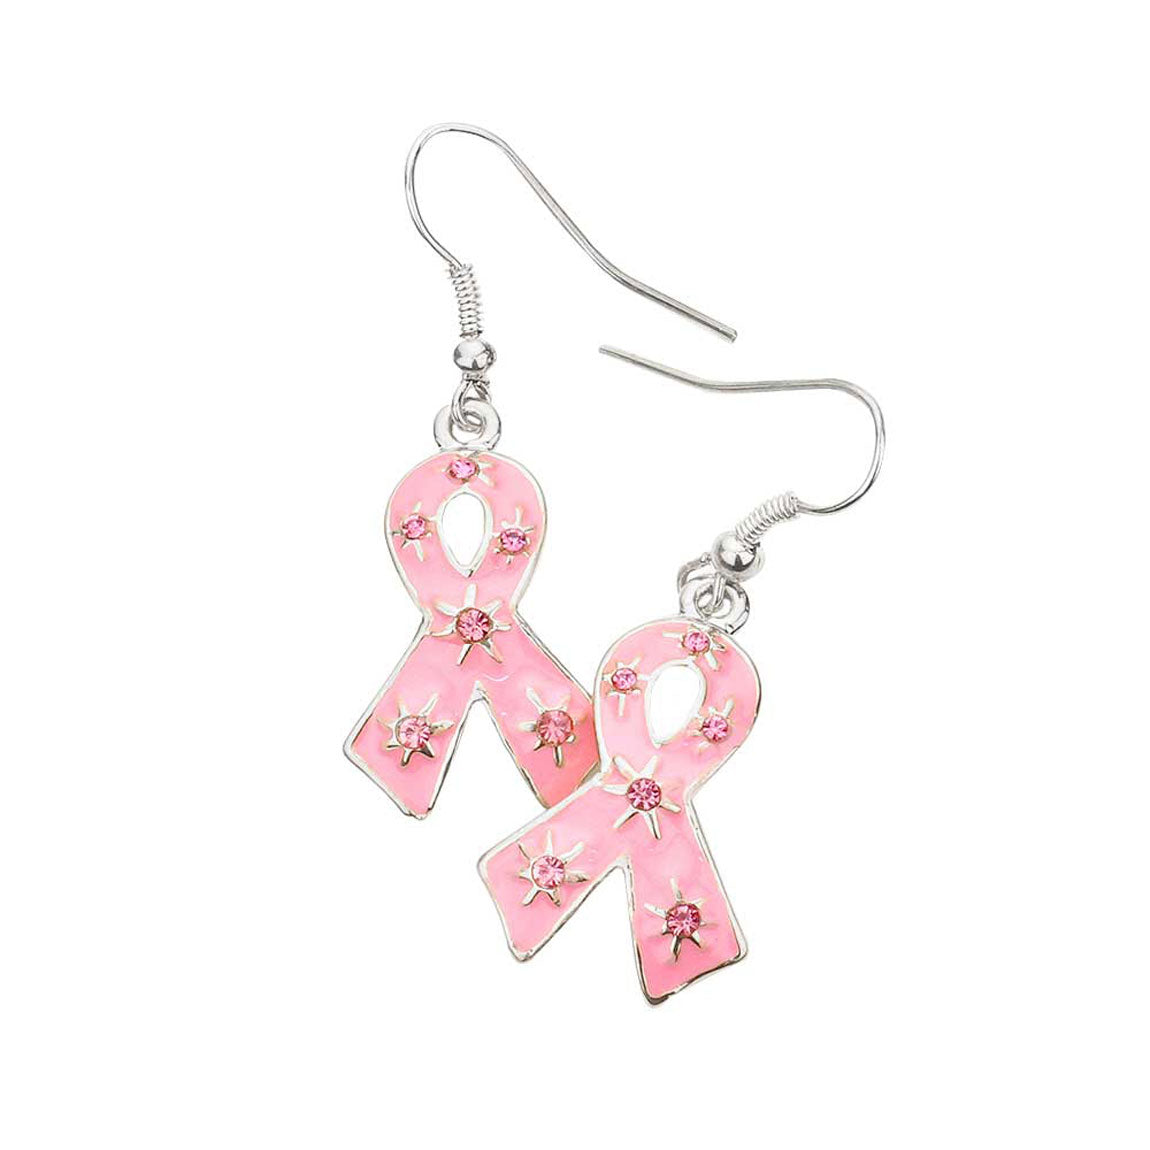 Gold Stone Embellished Enamel Pink Ribbon Dangle Earrings.  These gorgeous dangle pieces will show your class in any special occasion. The elegance of these stone goes unmatched, great for wearing at a party! Perfect jewelry to enhance your look. Awesome gift for birthday, Anniversary, Valentine’s Day or any special occasion.